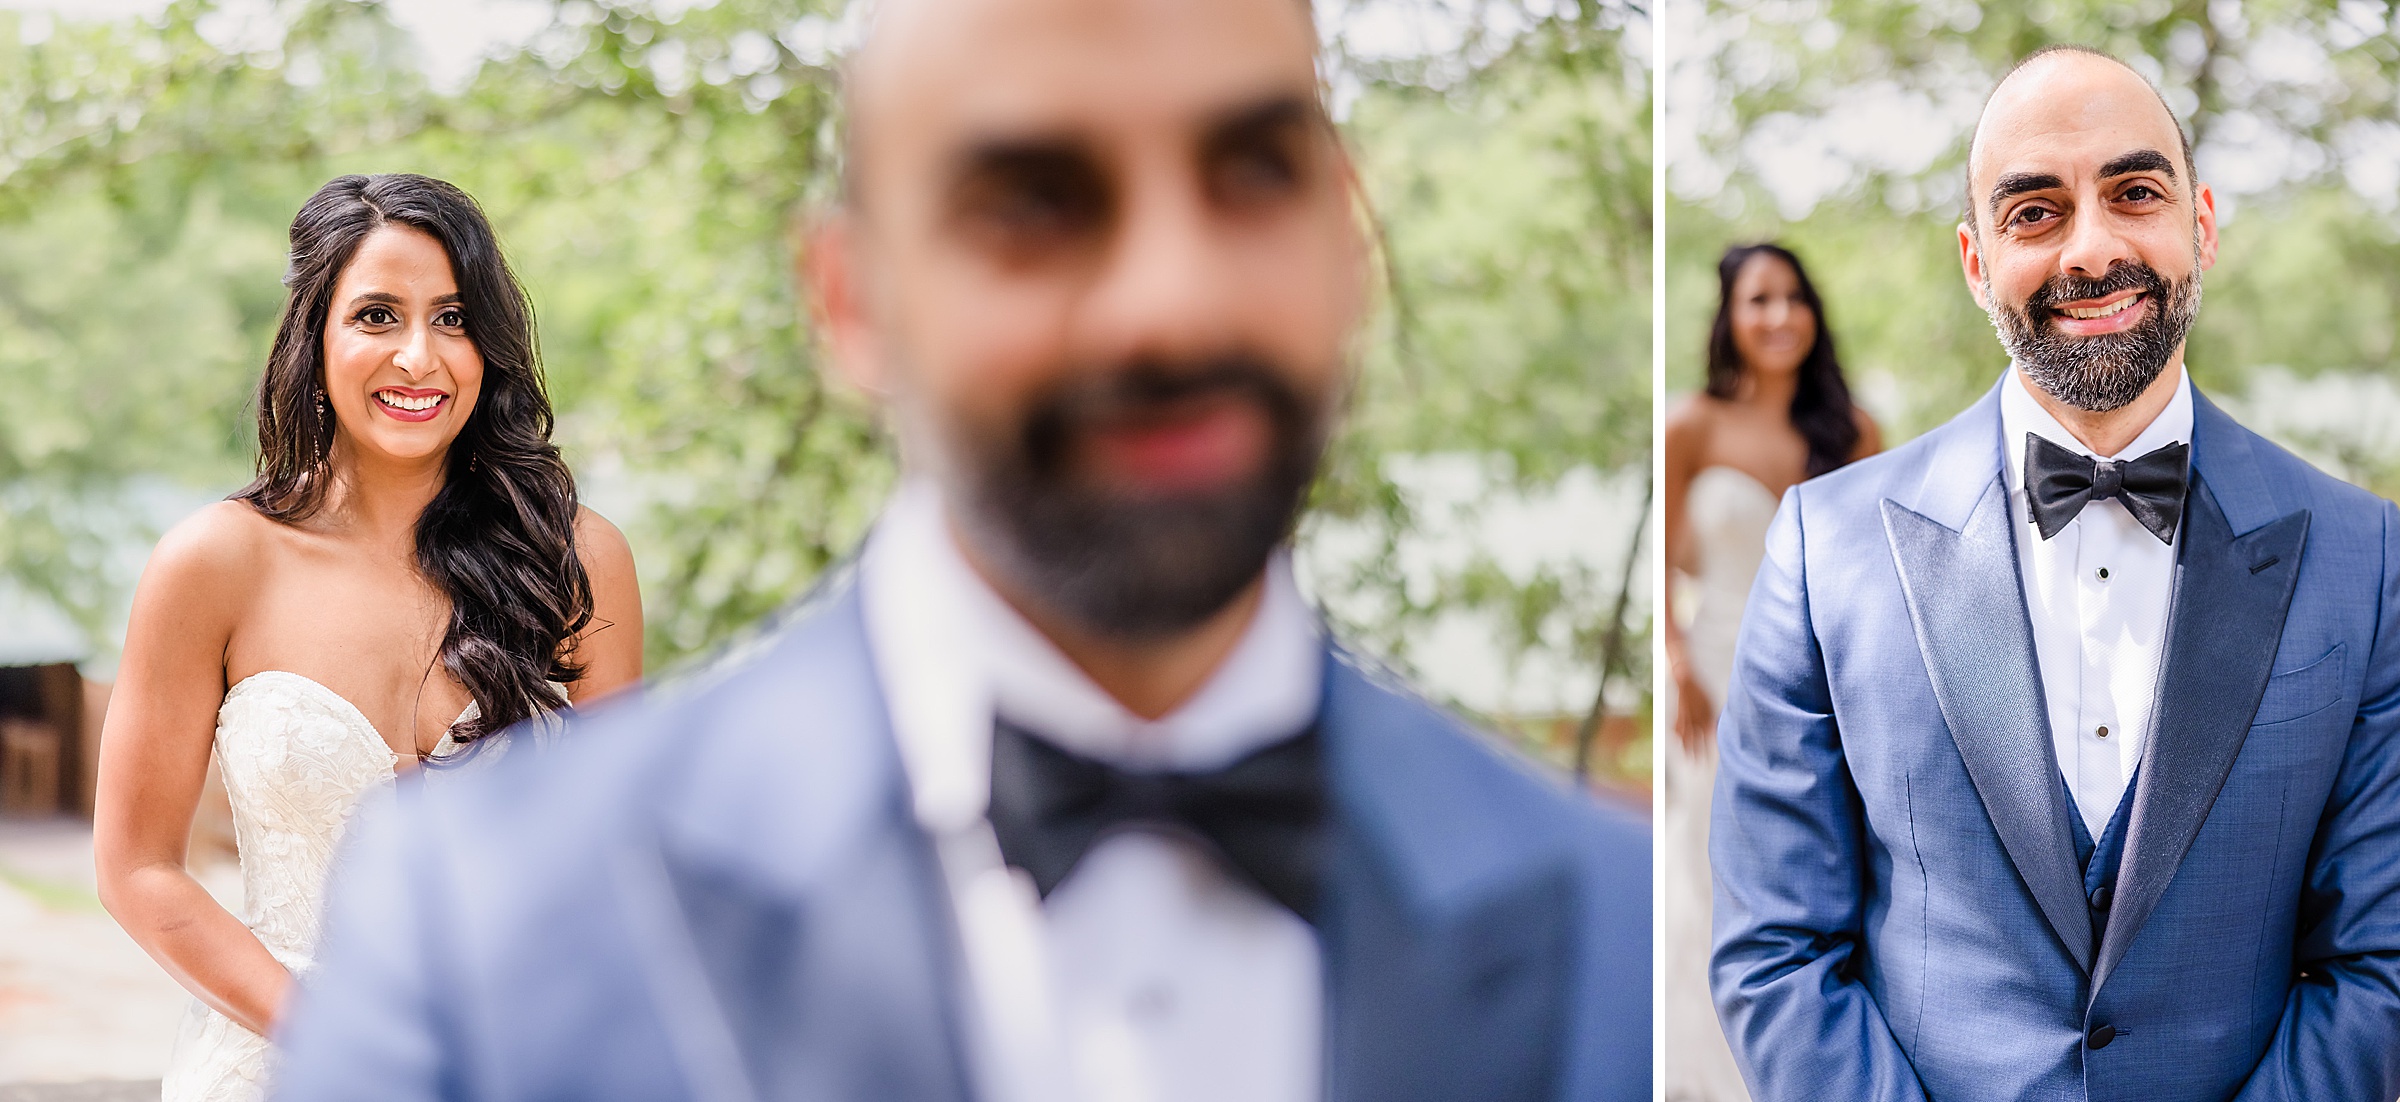 Bride and groom have a first look during a wedding at the Shiraz Garden in Bastrop, Texas.